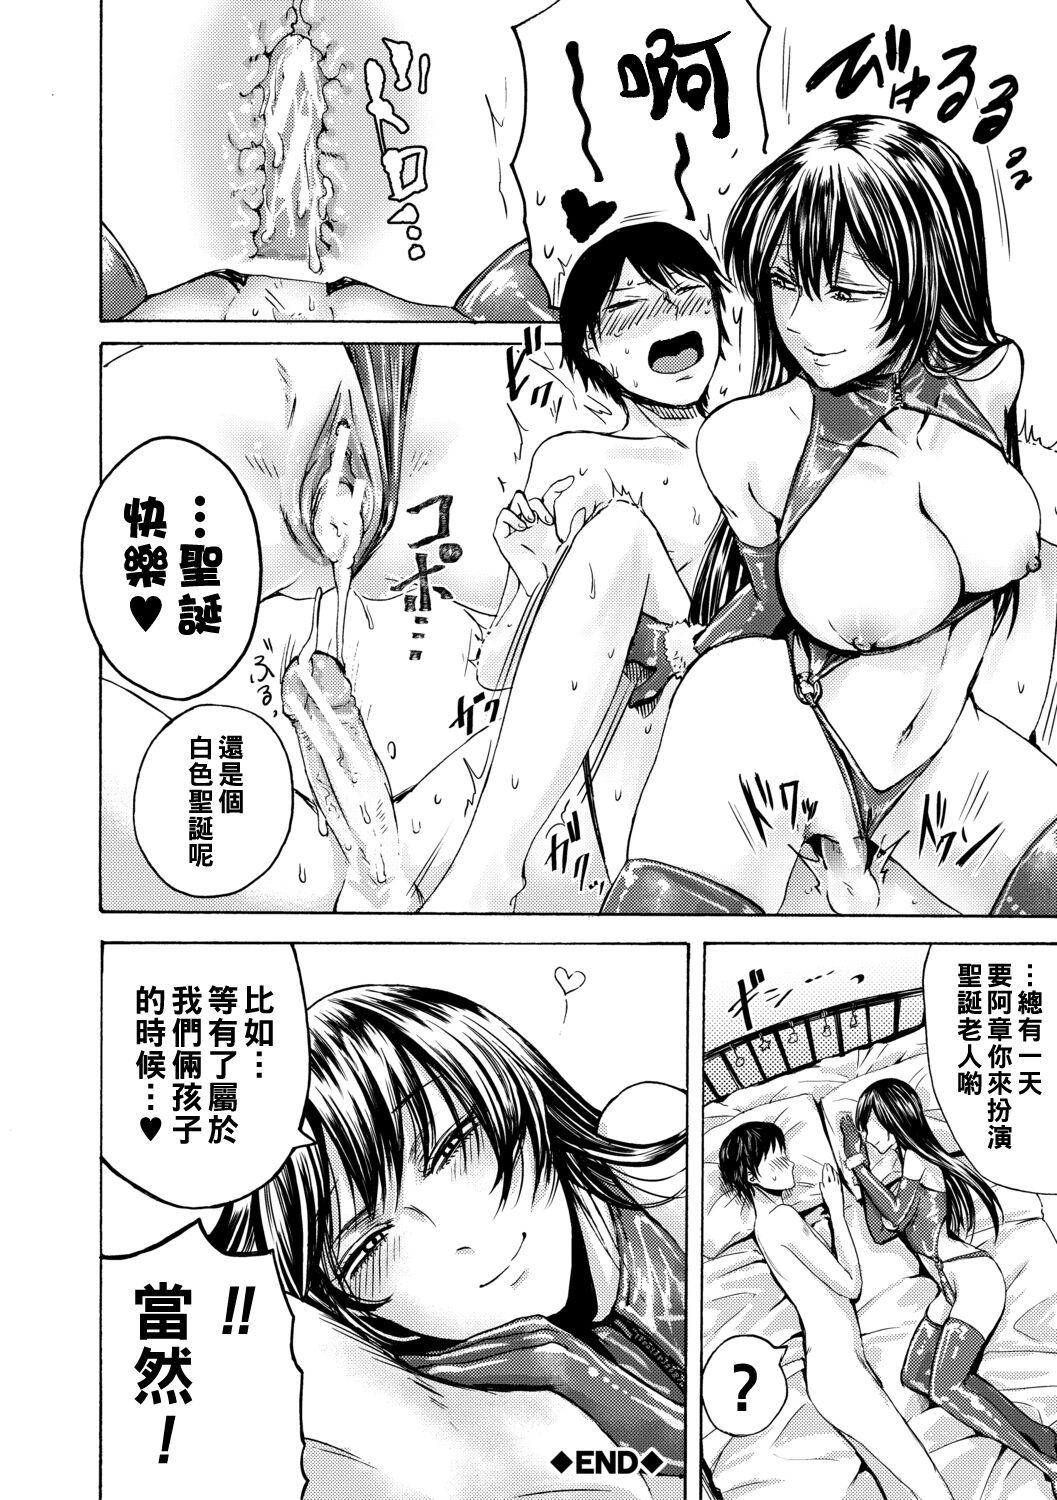 Trimmed 聖夜の彼ら（Chinese） Banging - Page 4